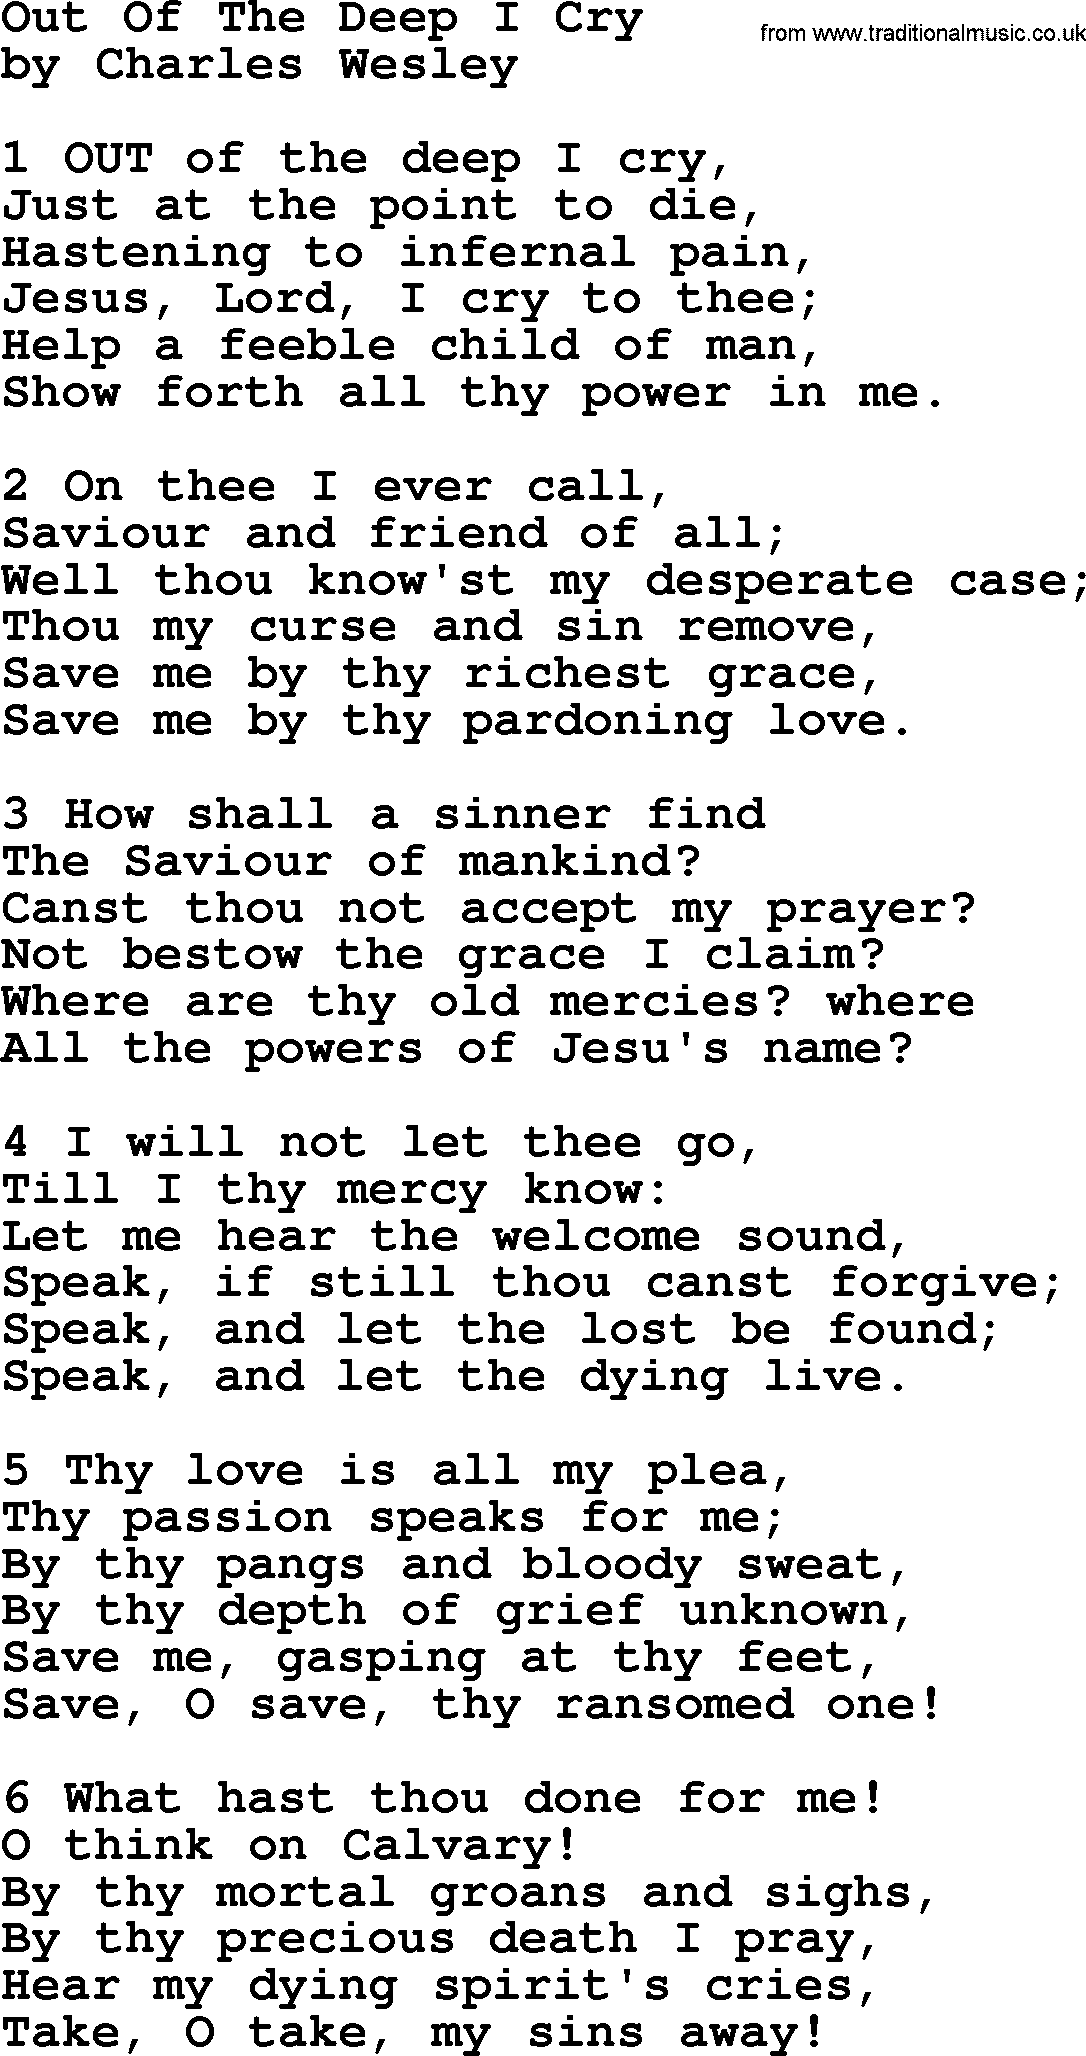 Charles Wesley hymn: Out Of The Deep I Cry, lyrics